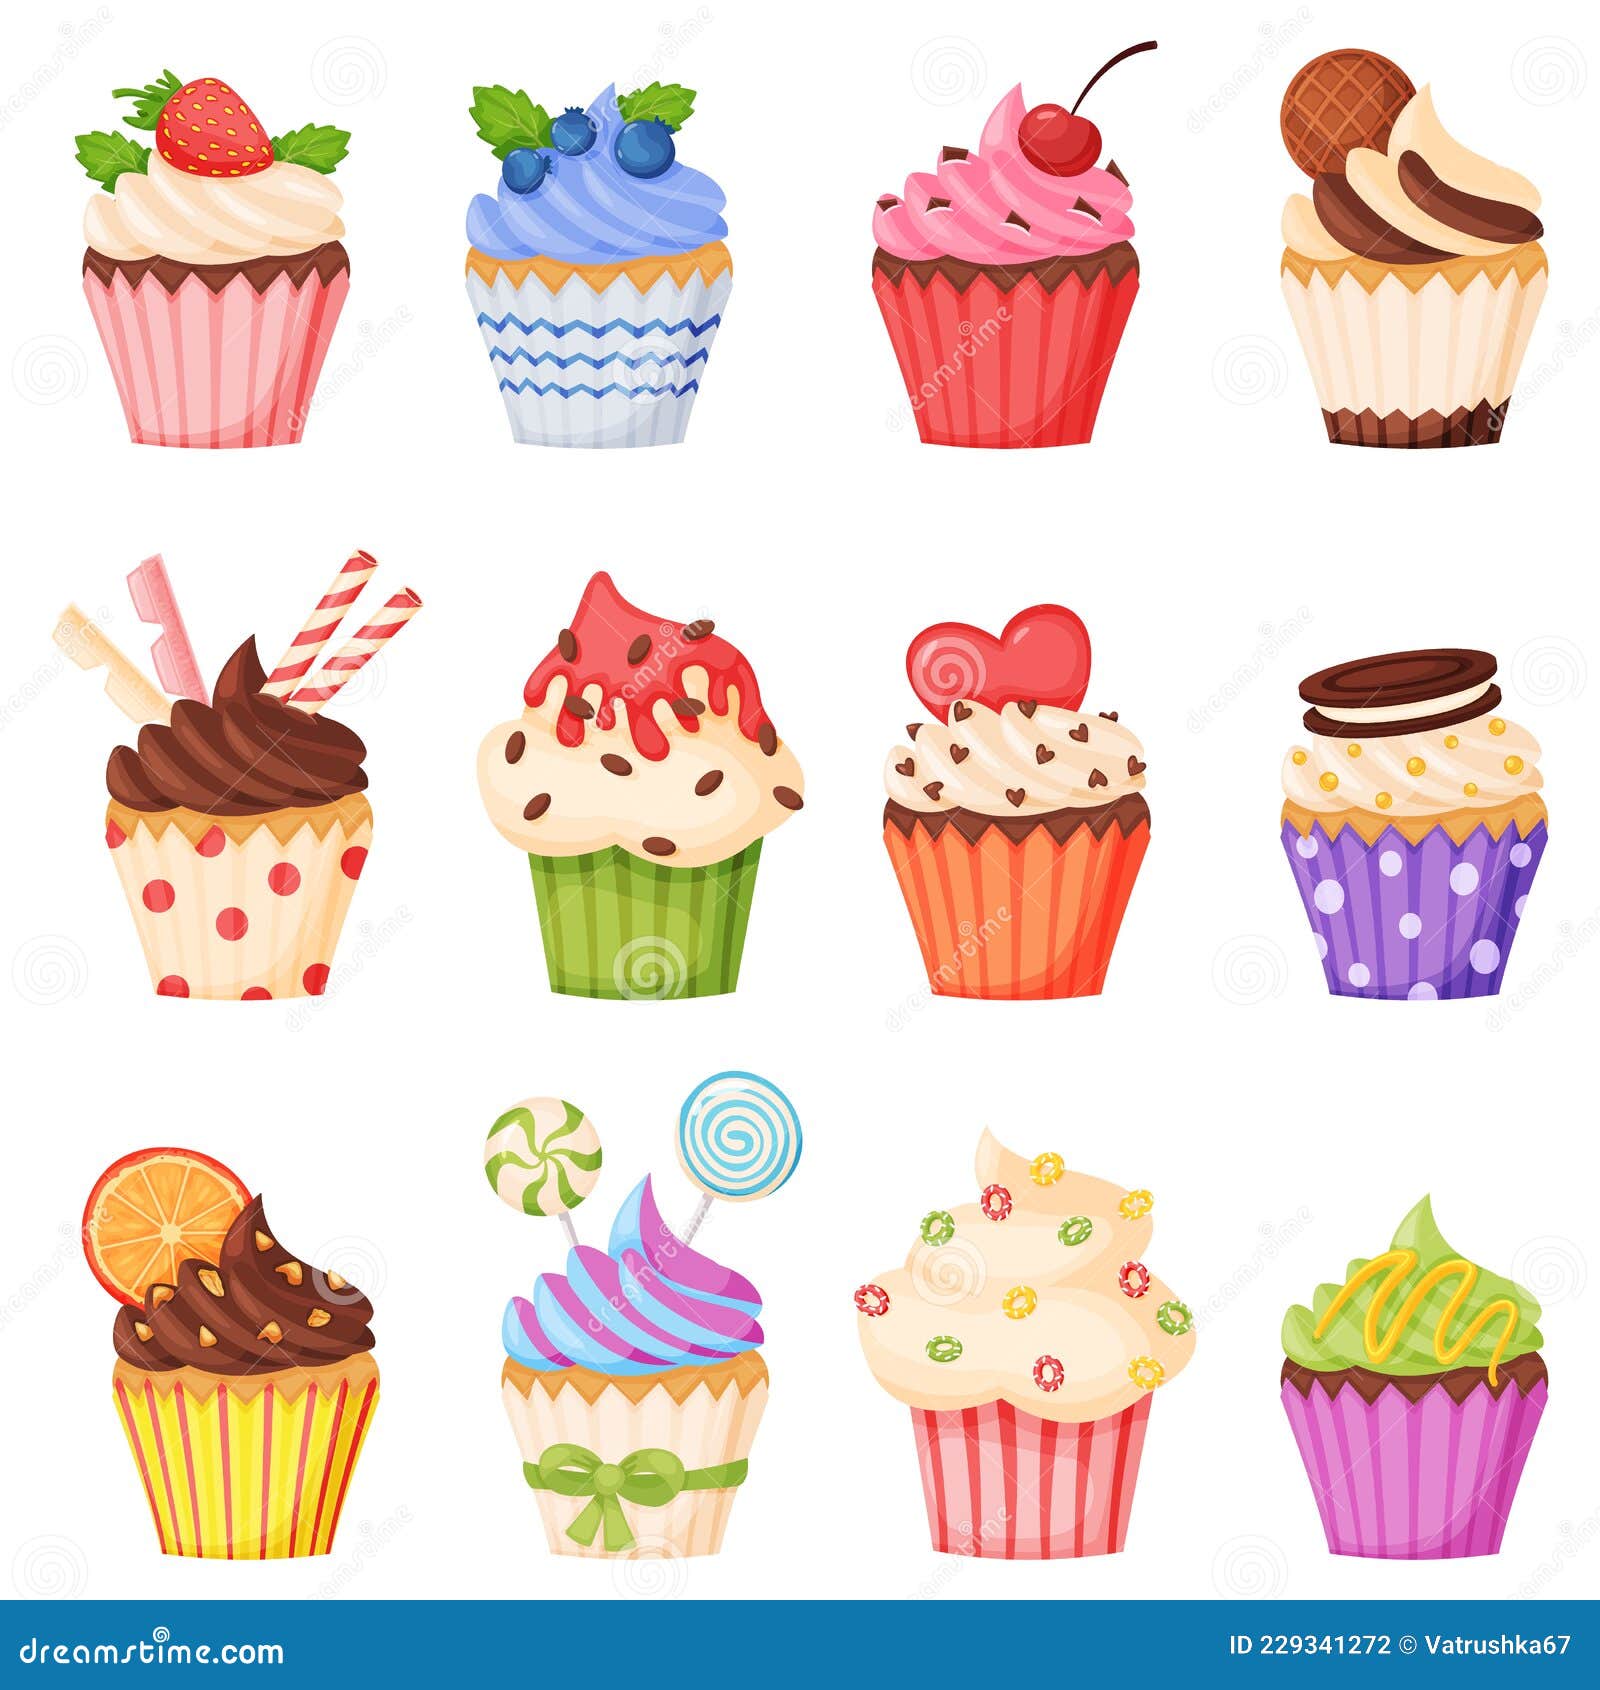 Cartoon Cupcake with Various Toppings, Delicious Sweet Desserts. Muffins or  Cupcakes with Chocolate Cream, Fruits Stock Vector - Illustration of  chocolate, fruit: 229341272